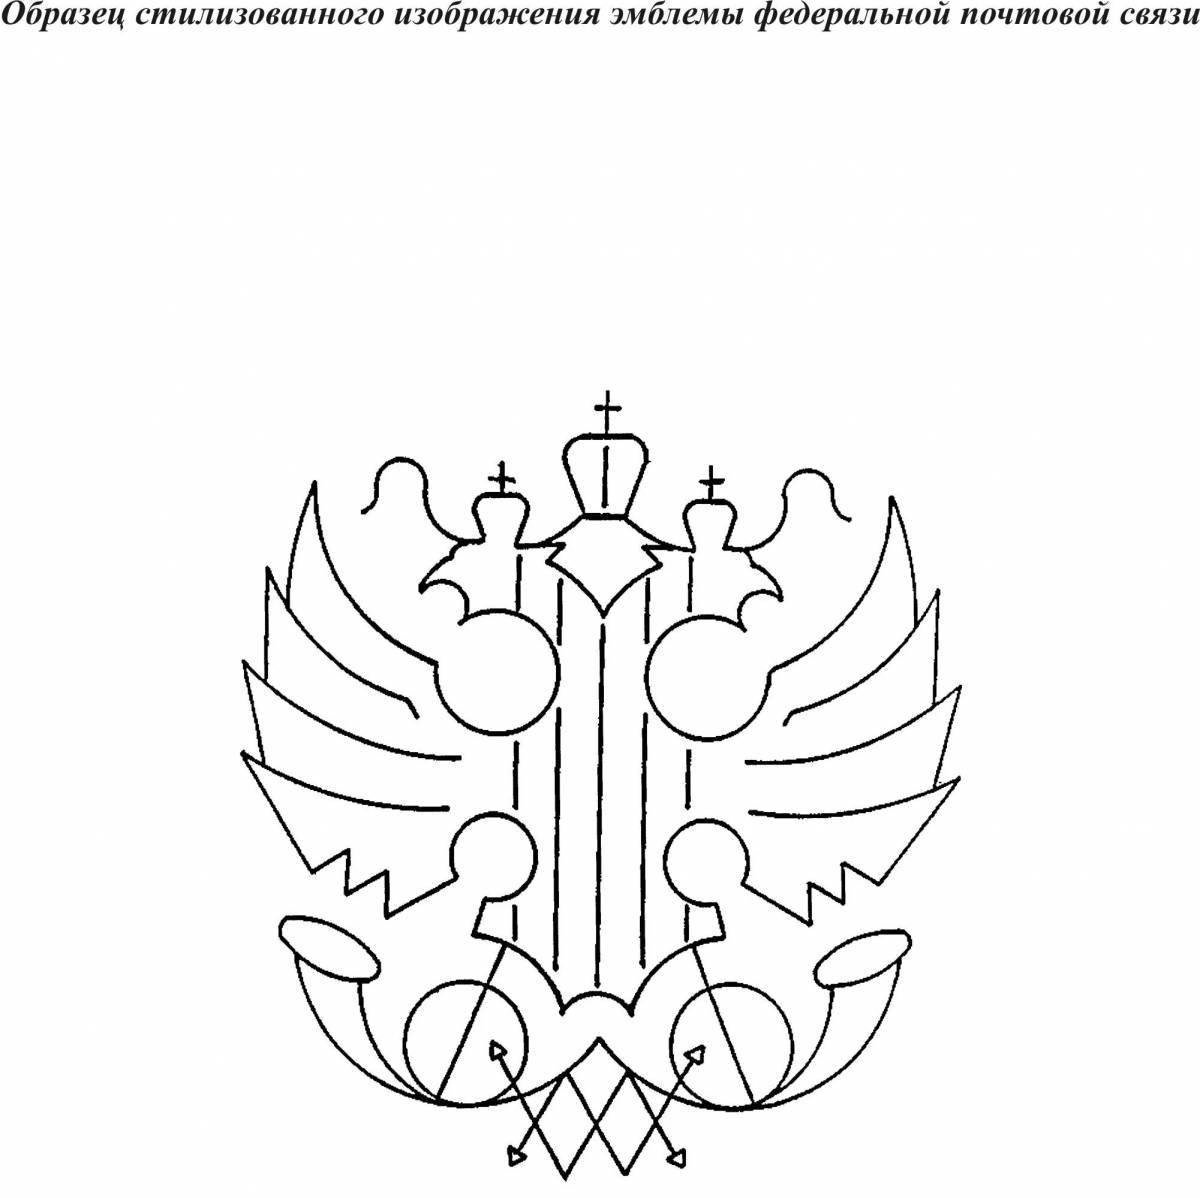 Large coat of arms of the Russian Federation for juniors